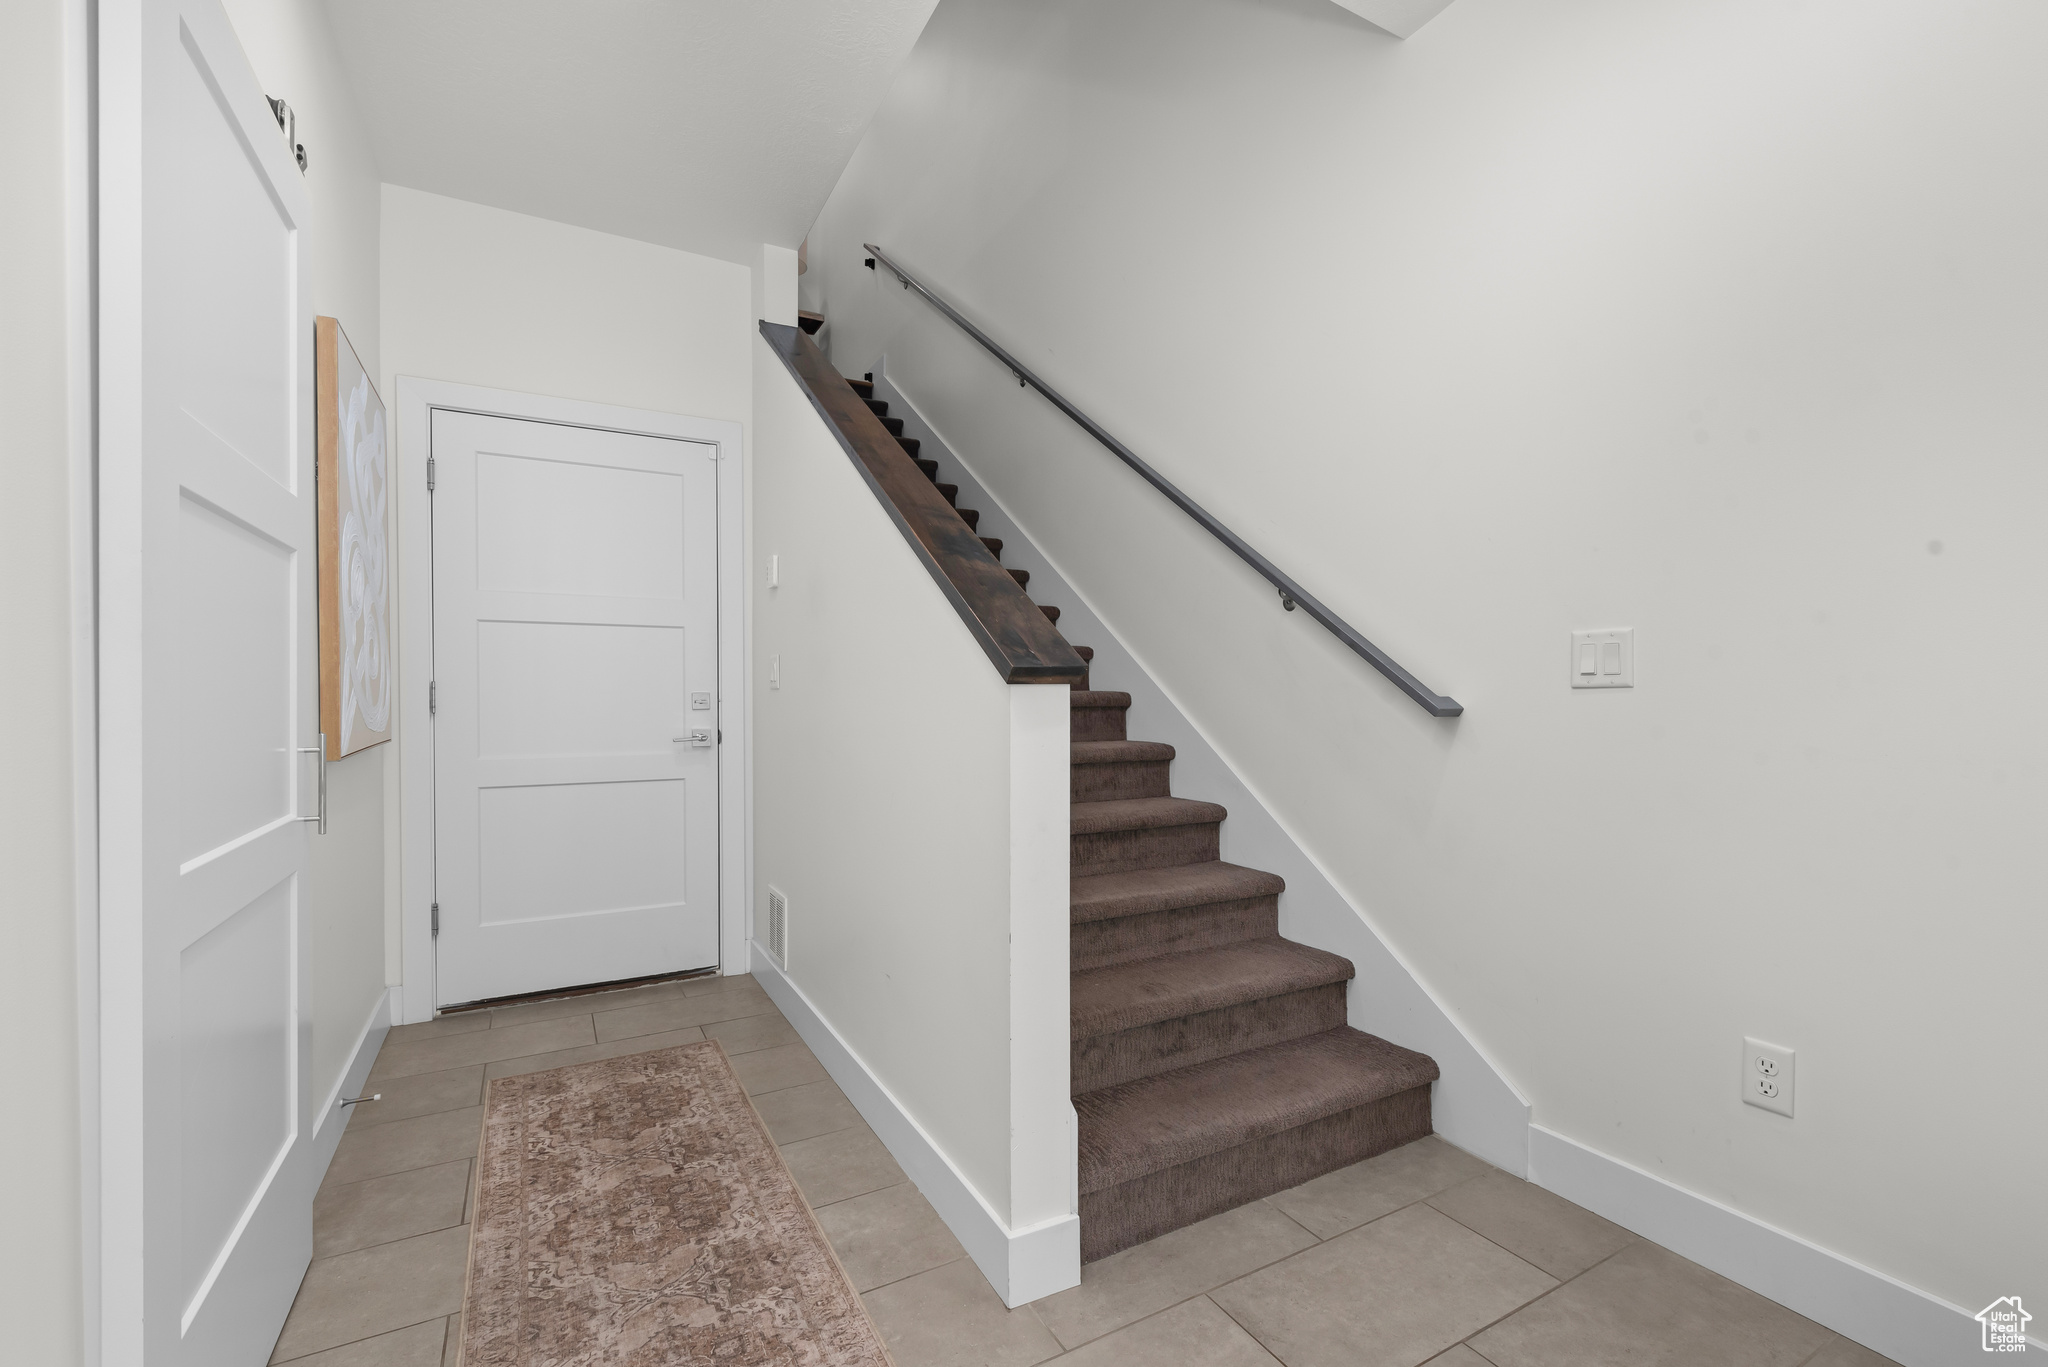 Maine level entry Stairs featuring light tile floors